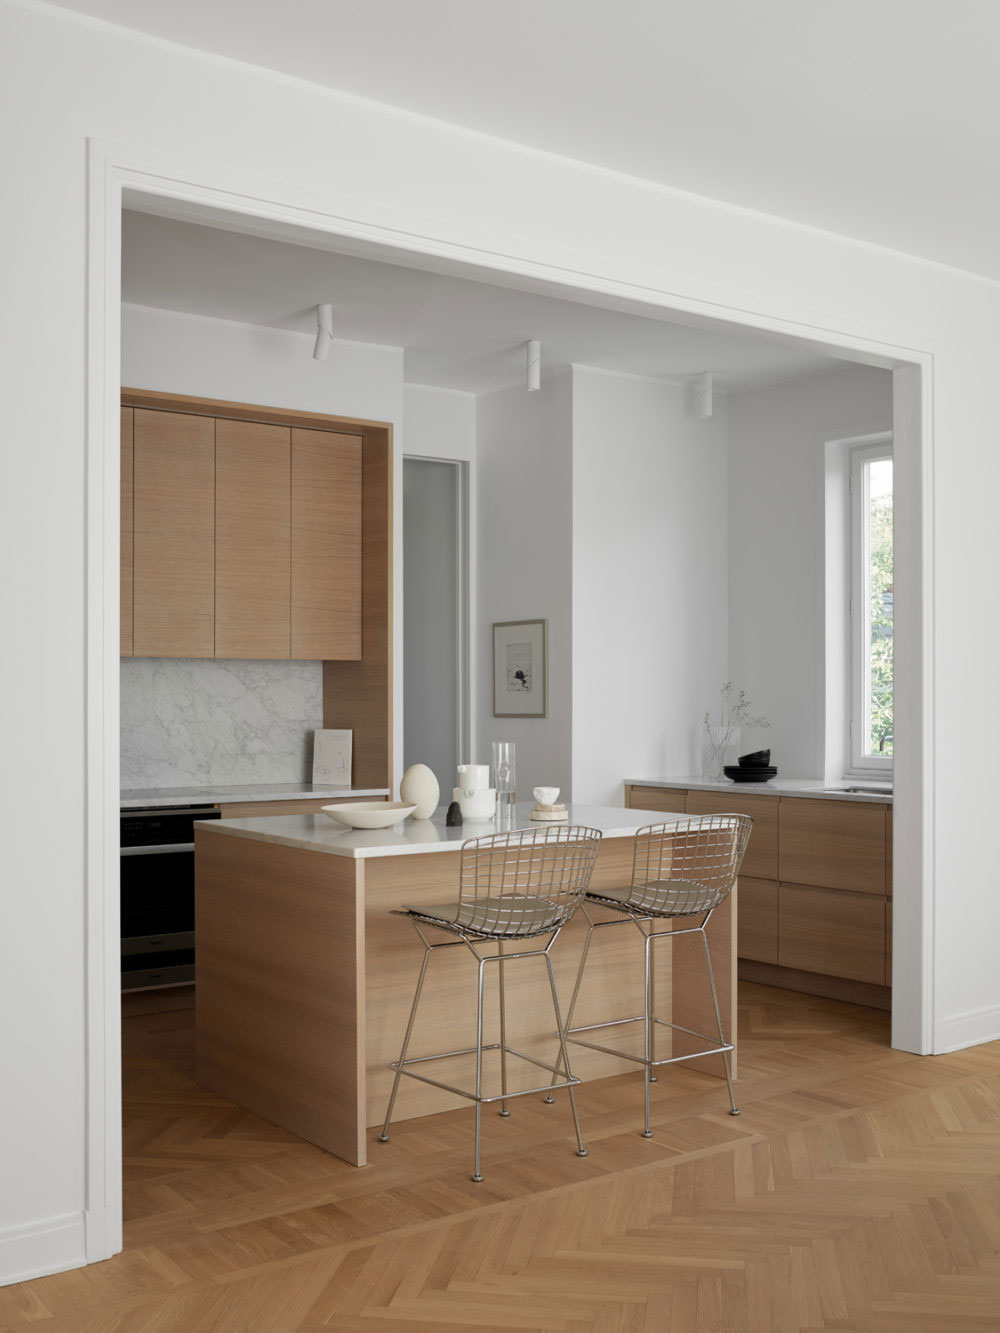 9 Fantastic Kitchens with Wooden Cabinets Done Right - Nordic Design